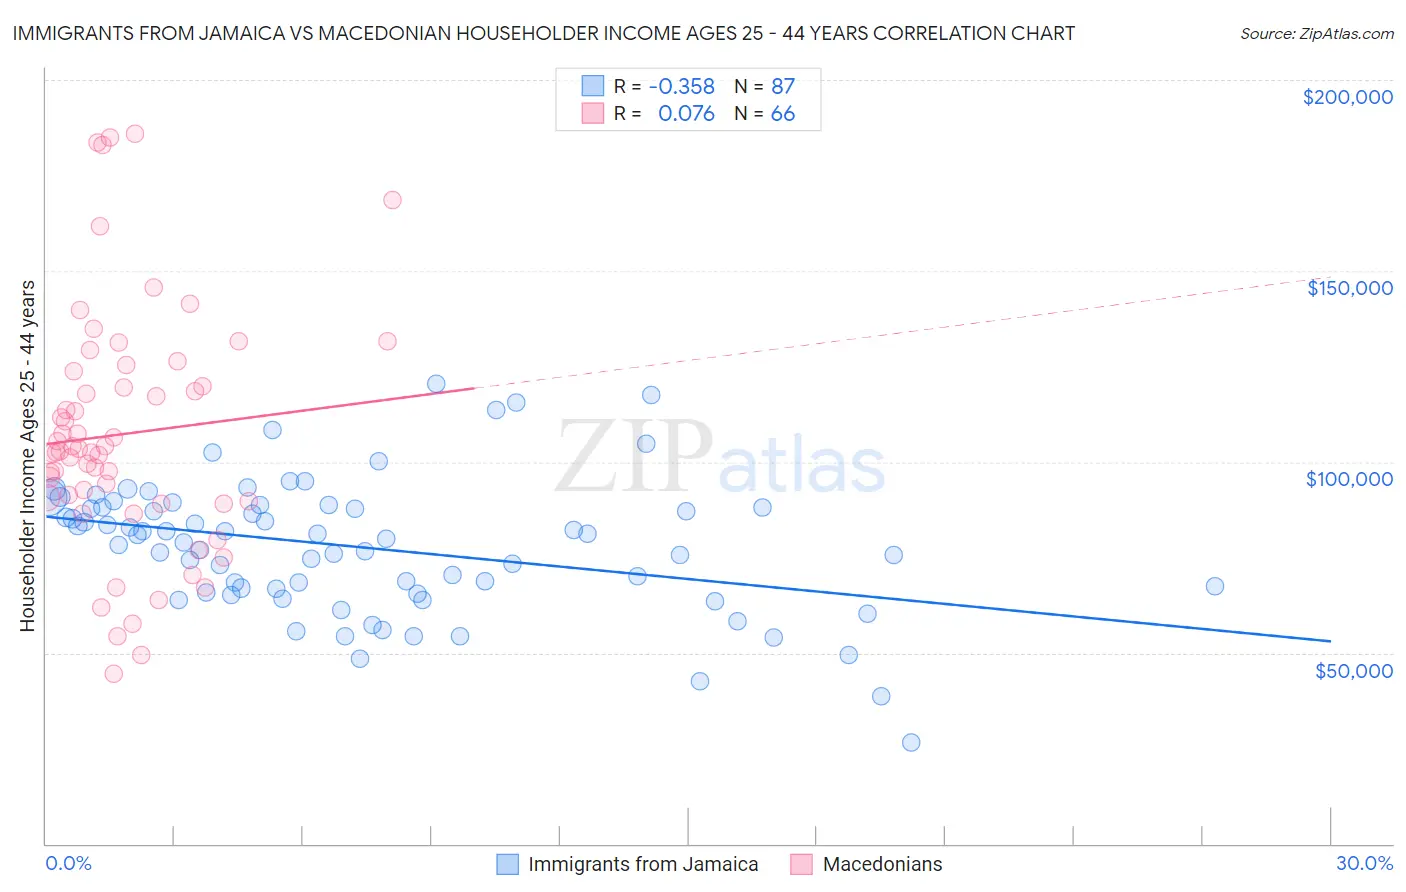 Immigrants from Jamaica vs Macedonian Householder Income Ages 25 - 44 years